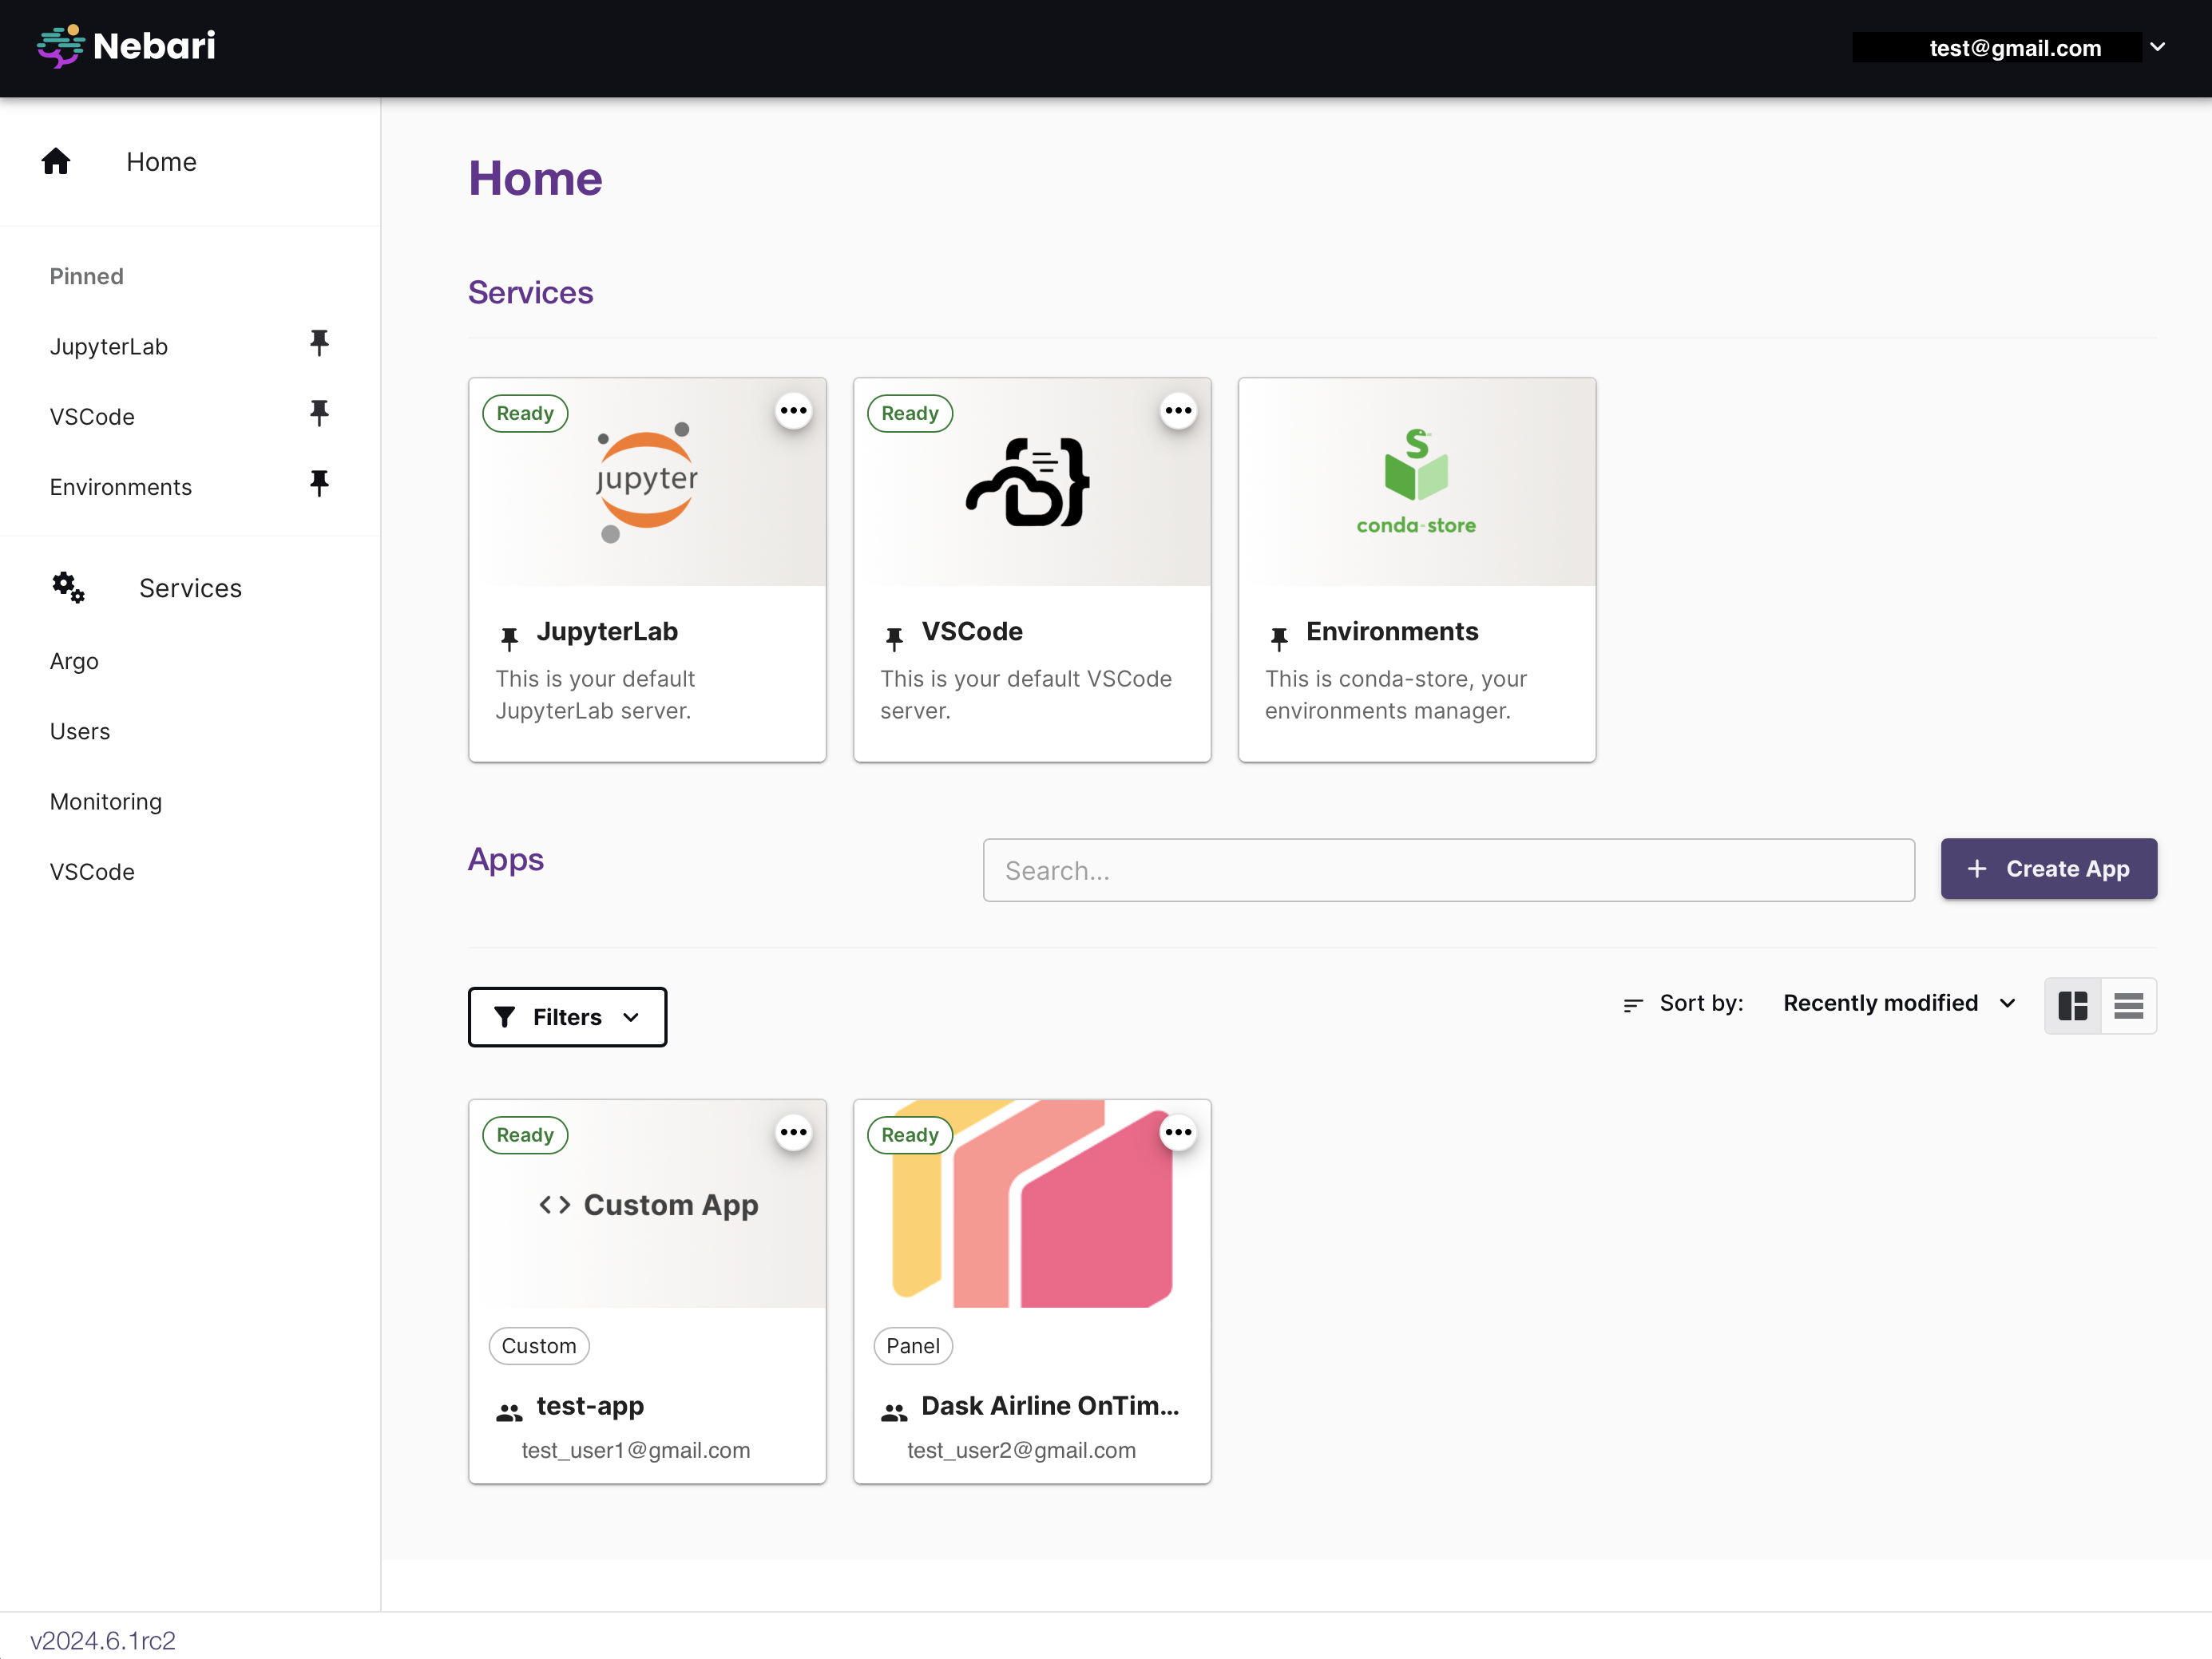 Nebari home page with Services: JupyterLab, Argo, Users, Environments, Monitoring, VSCode; My Apps: JupyterLab (default JupyterLab instance); and Shared Apps.